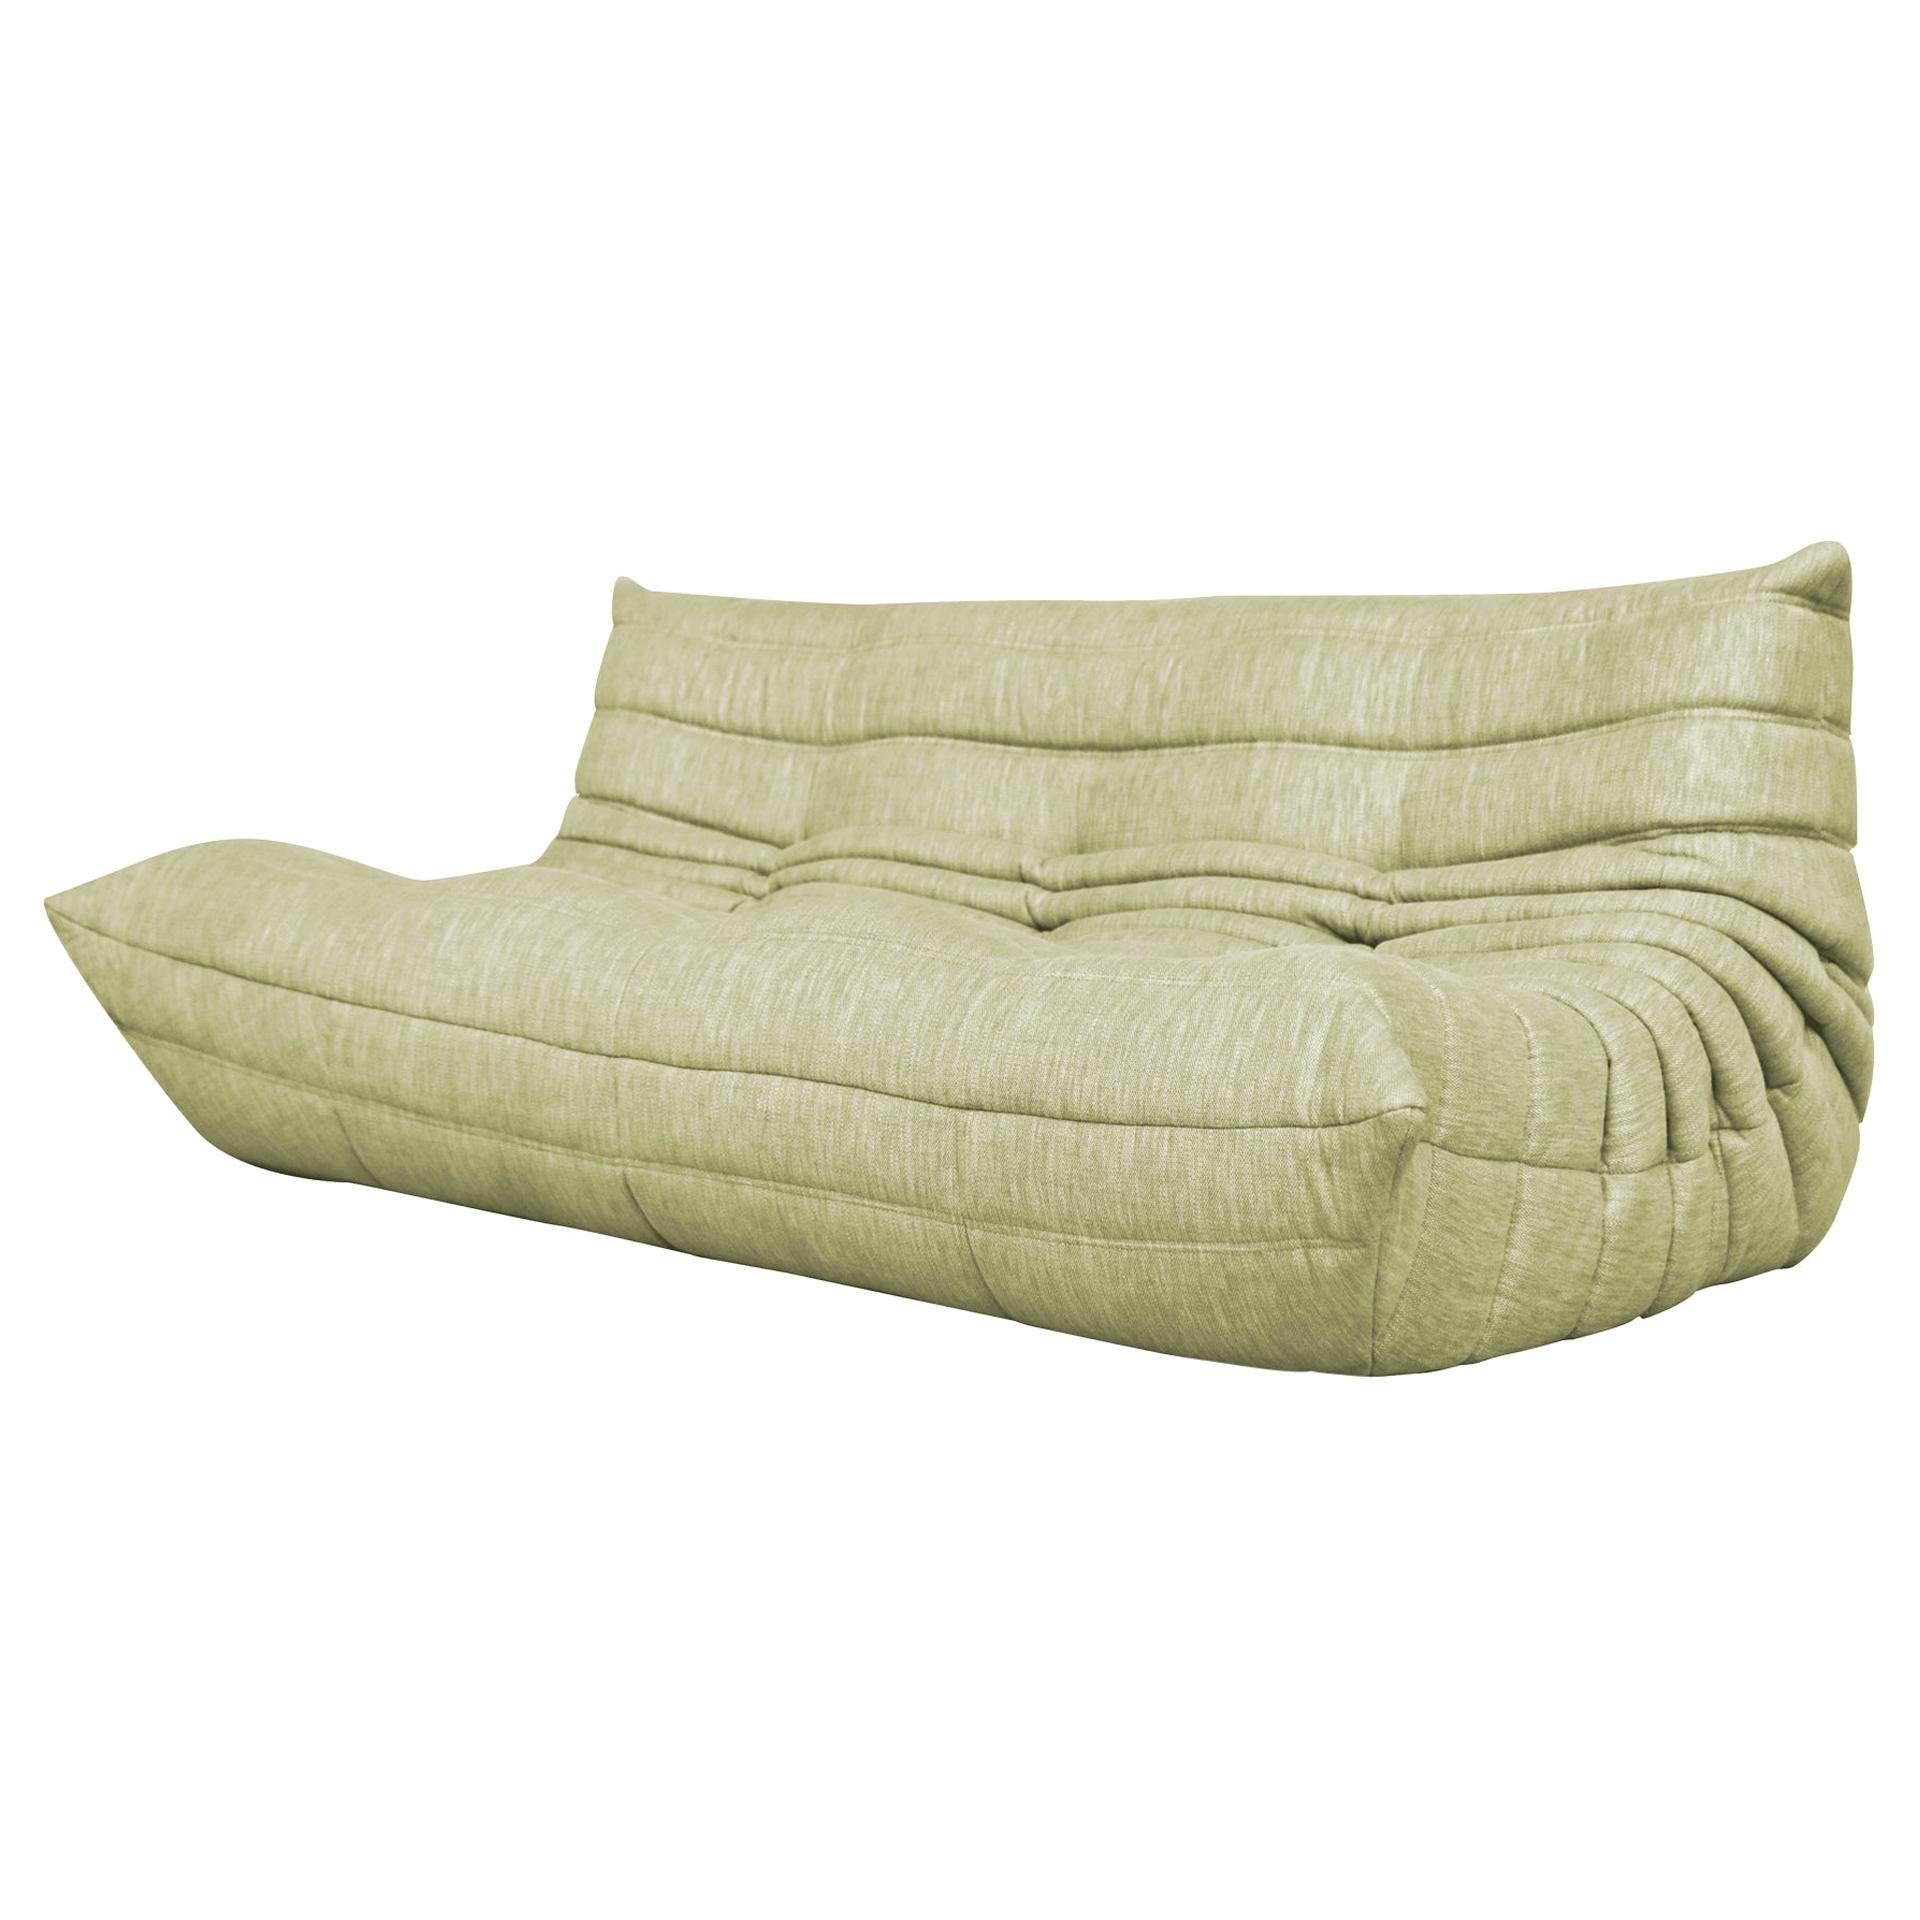 CERTIFIED Ligne Roset TOGO Large Settee in Durable Olive Fabric, DIAMOND QUALITY For Sale